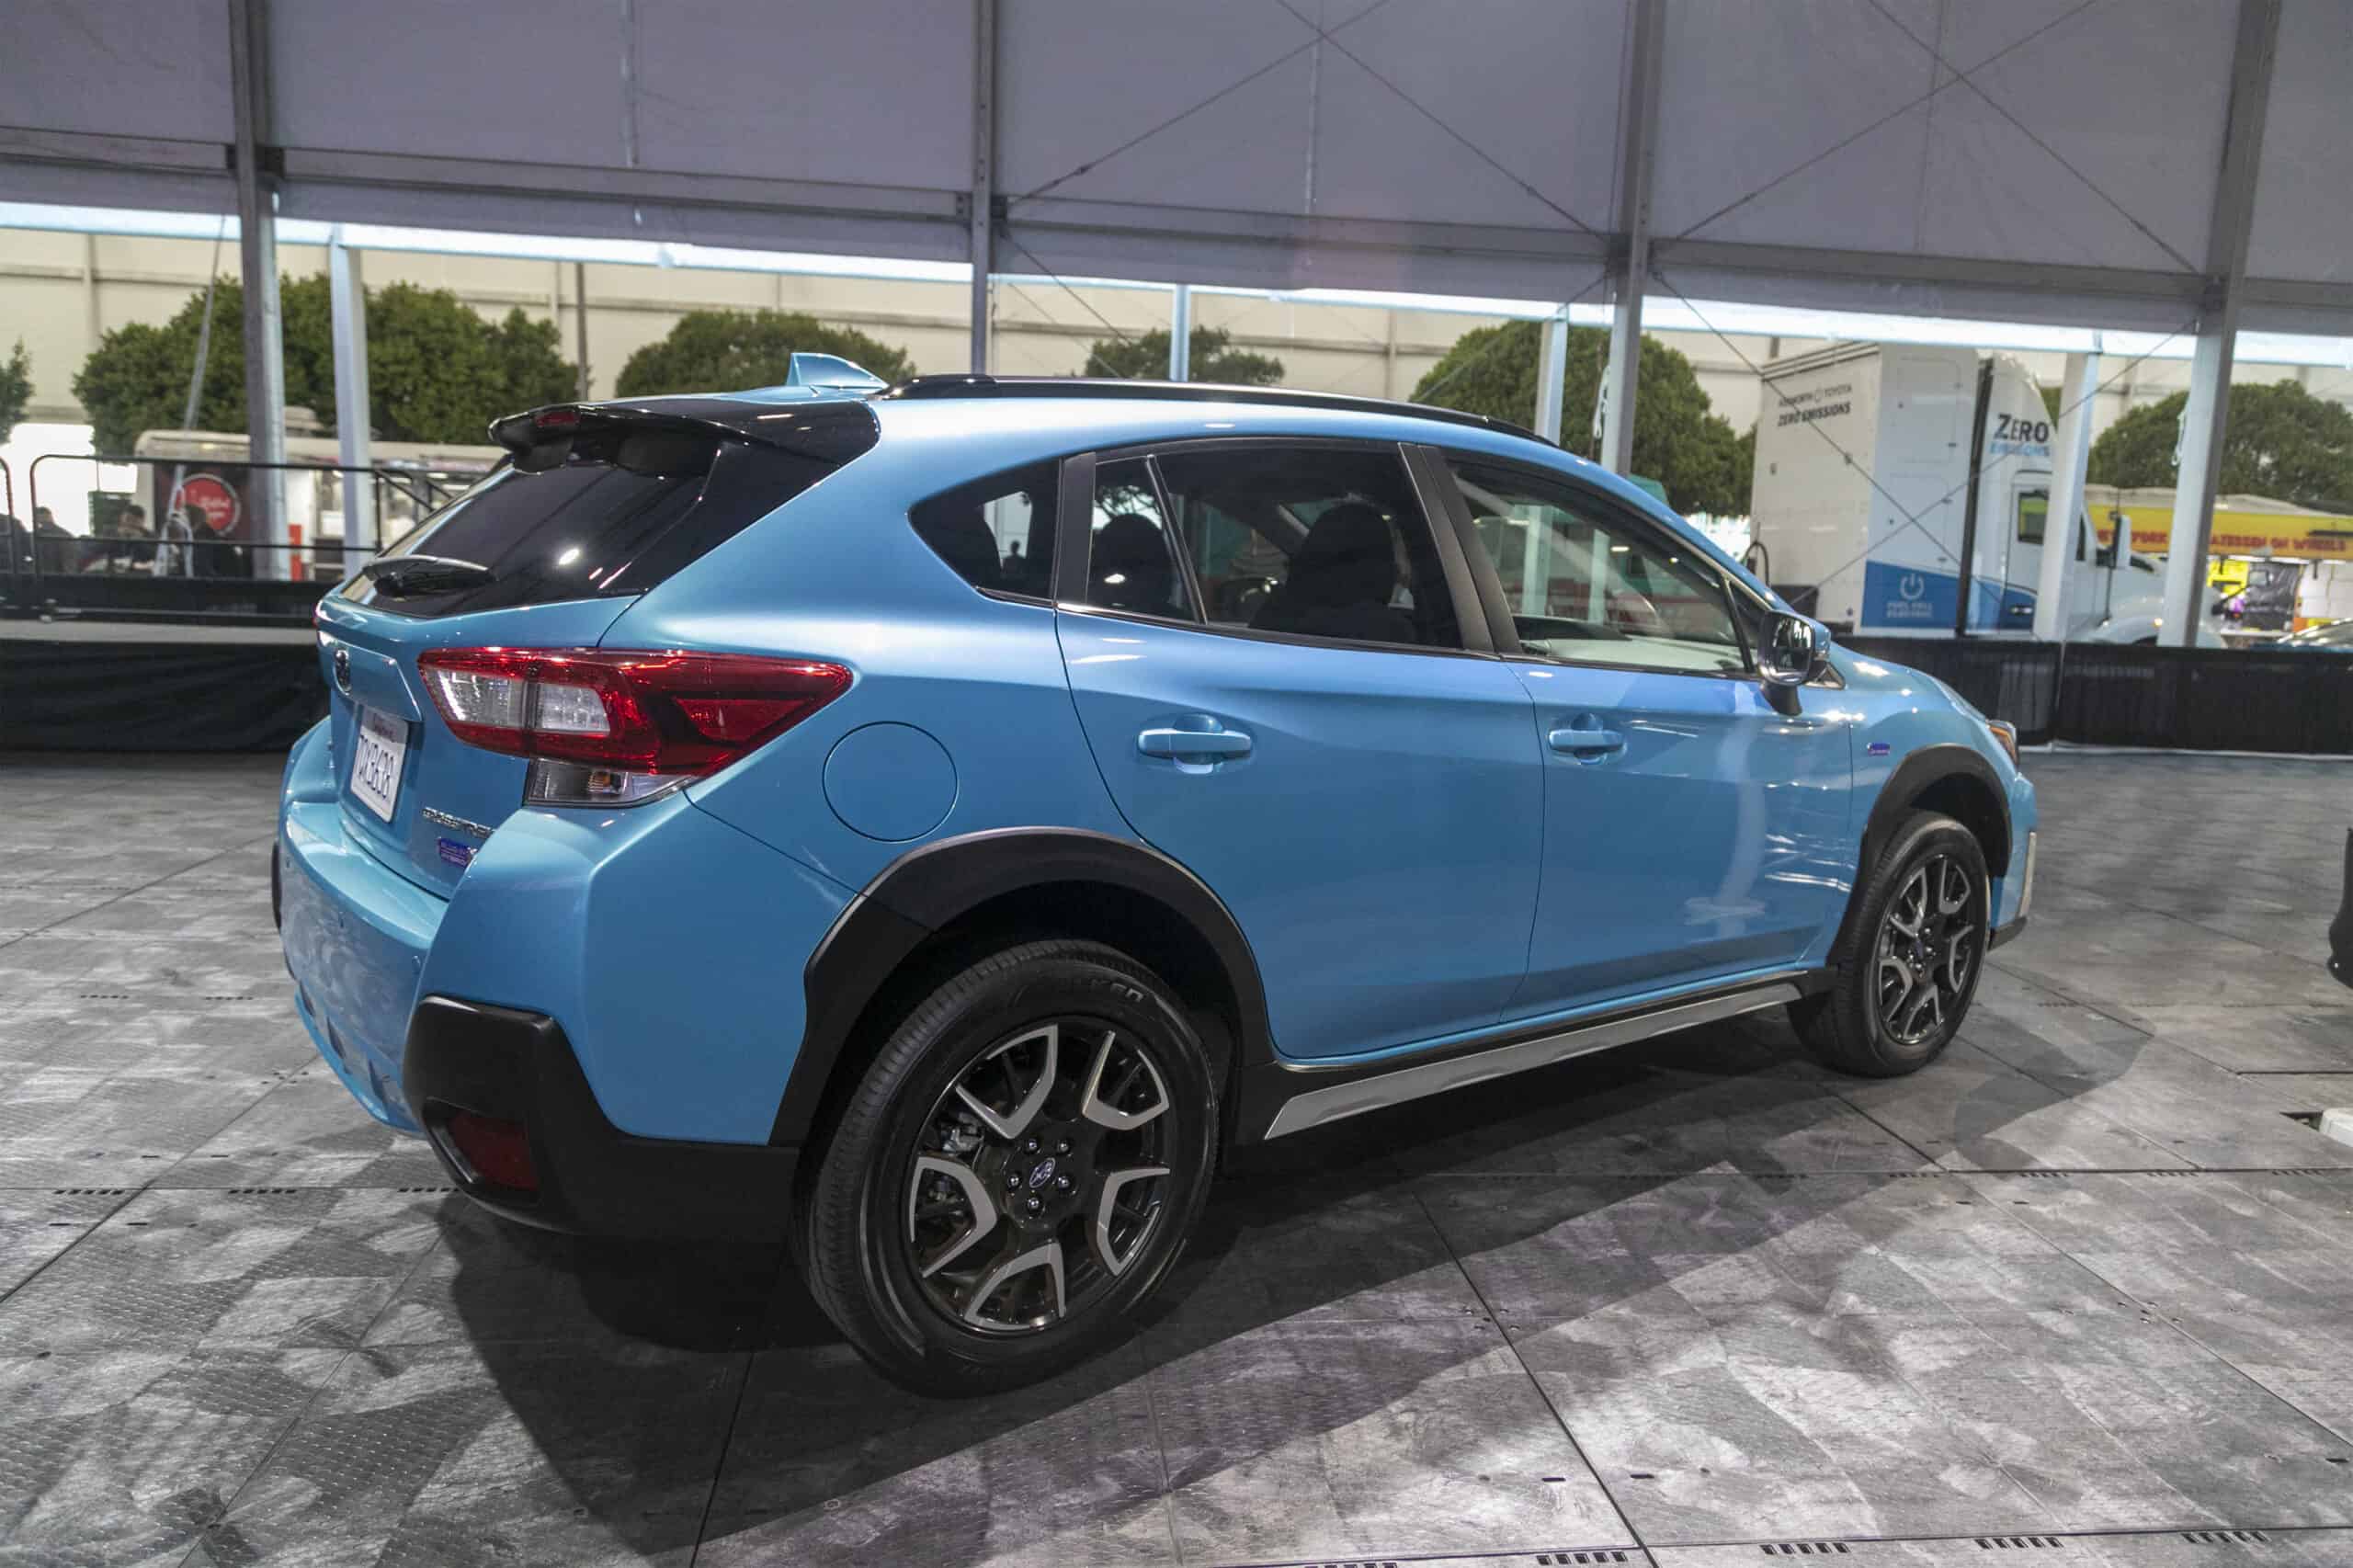 LOS ANGELES, CA - NOVEMBER 21: The Subaru Crosstrek plug-ing hybrid is shown at AutoMobility LA on November 21, 2019 in Los Angeles, California. The four-day press and trade event precedes the Los Angeles Auto Show, which runs November 22 through December 1. (Photo by David McNew/Getty Images)